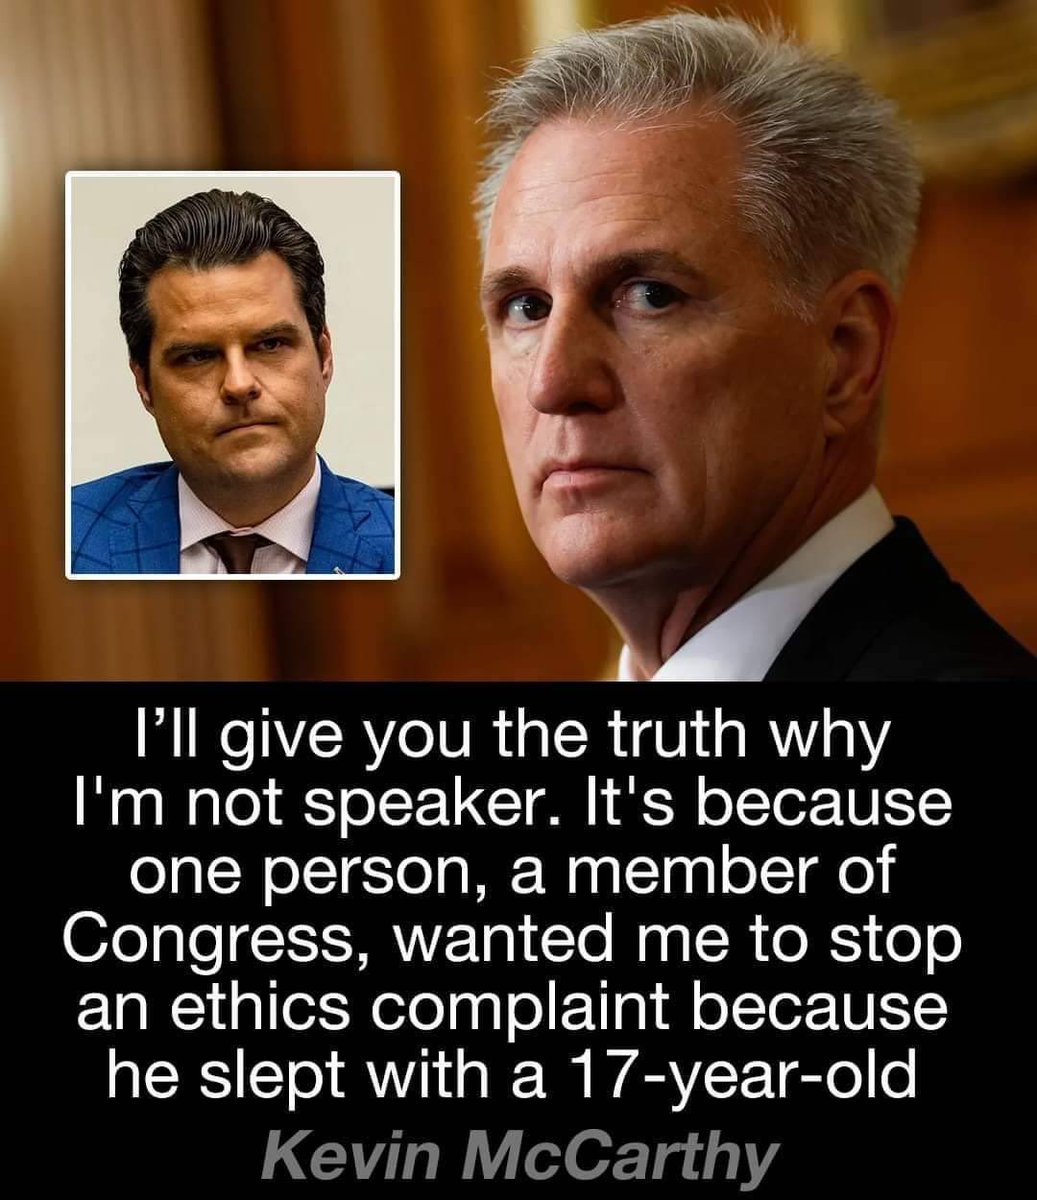 “I’ll give you the truth why I’m not Speaker. It’s because one person, a member of Congress, wanted me to stop an ethnics complaint because he slept with a 17 year old.” — Kevin McCarthy